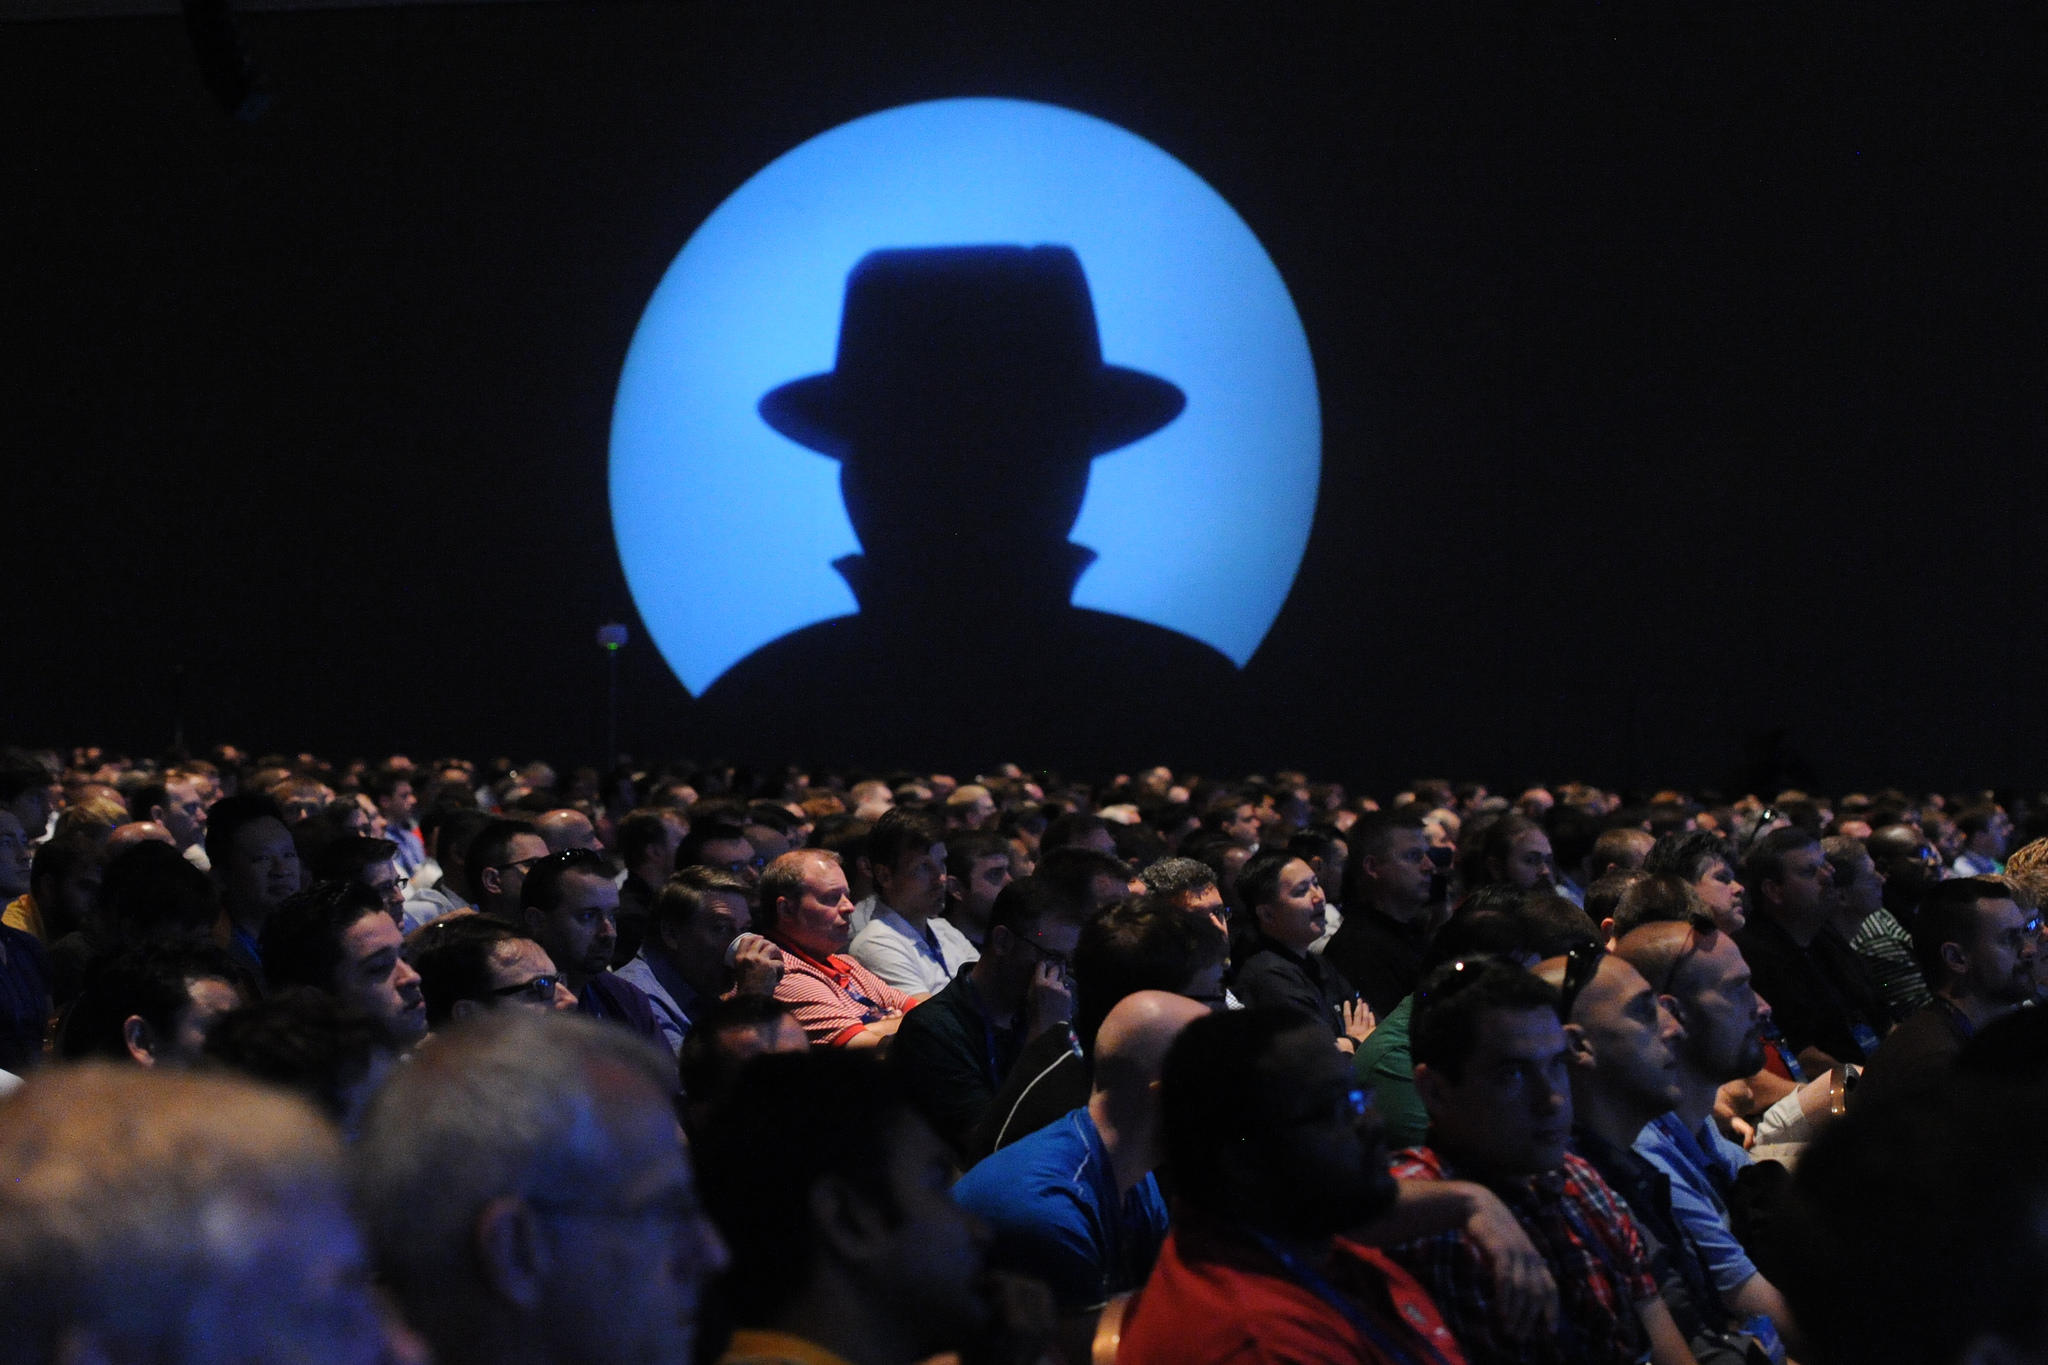 Black Hat USA Announces Briefings and Programs for 2020 Virtual Event